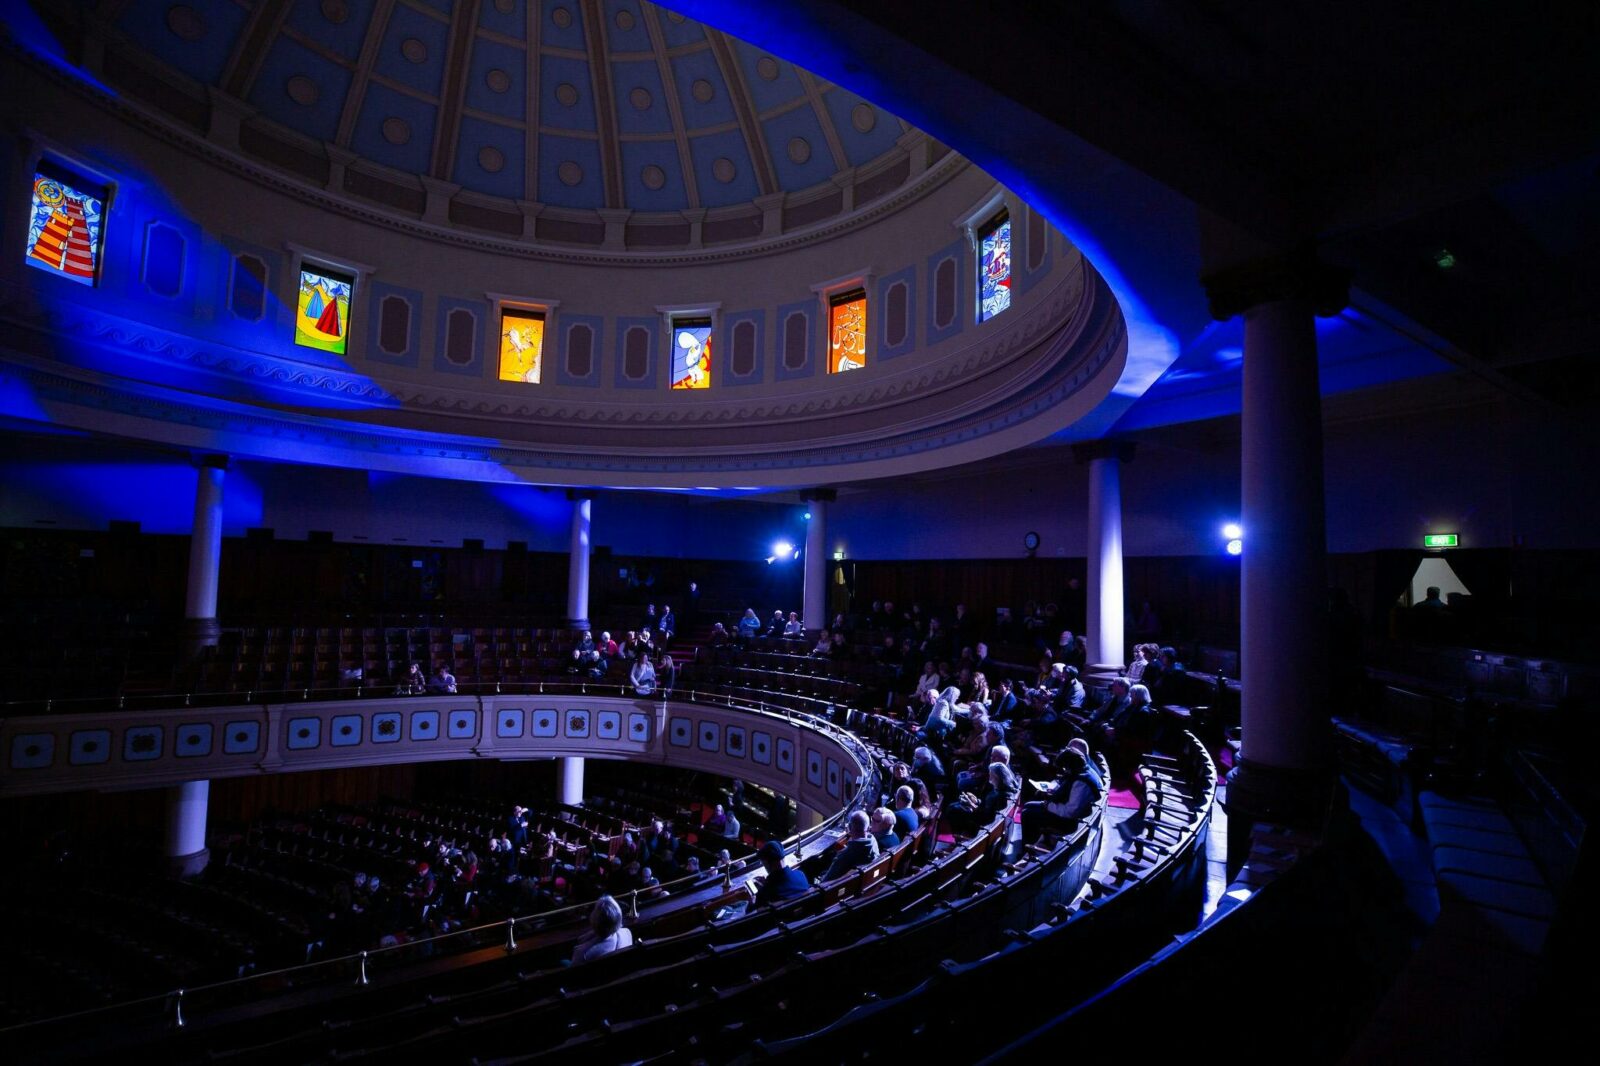 Image of a concert at Toorak Synagogue, Blue lighting, stained glass windows and a full house